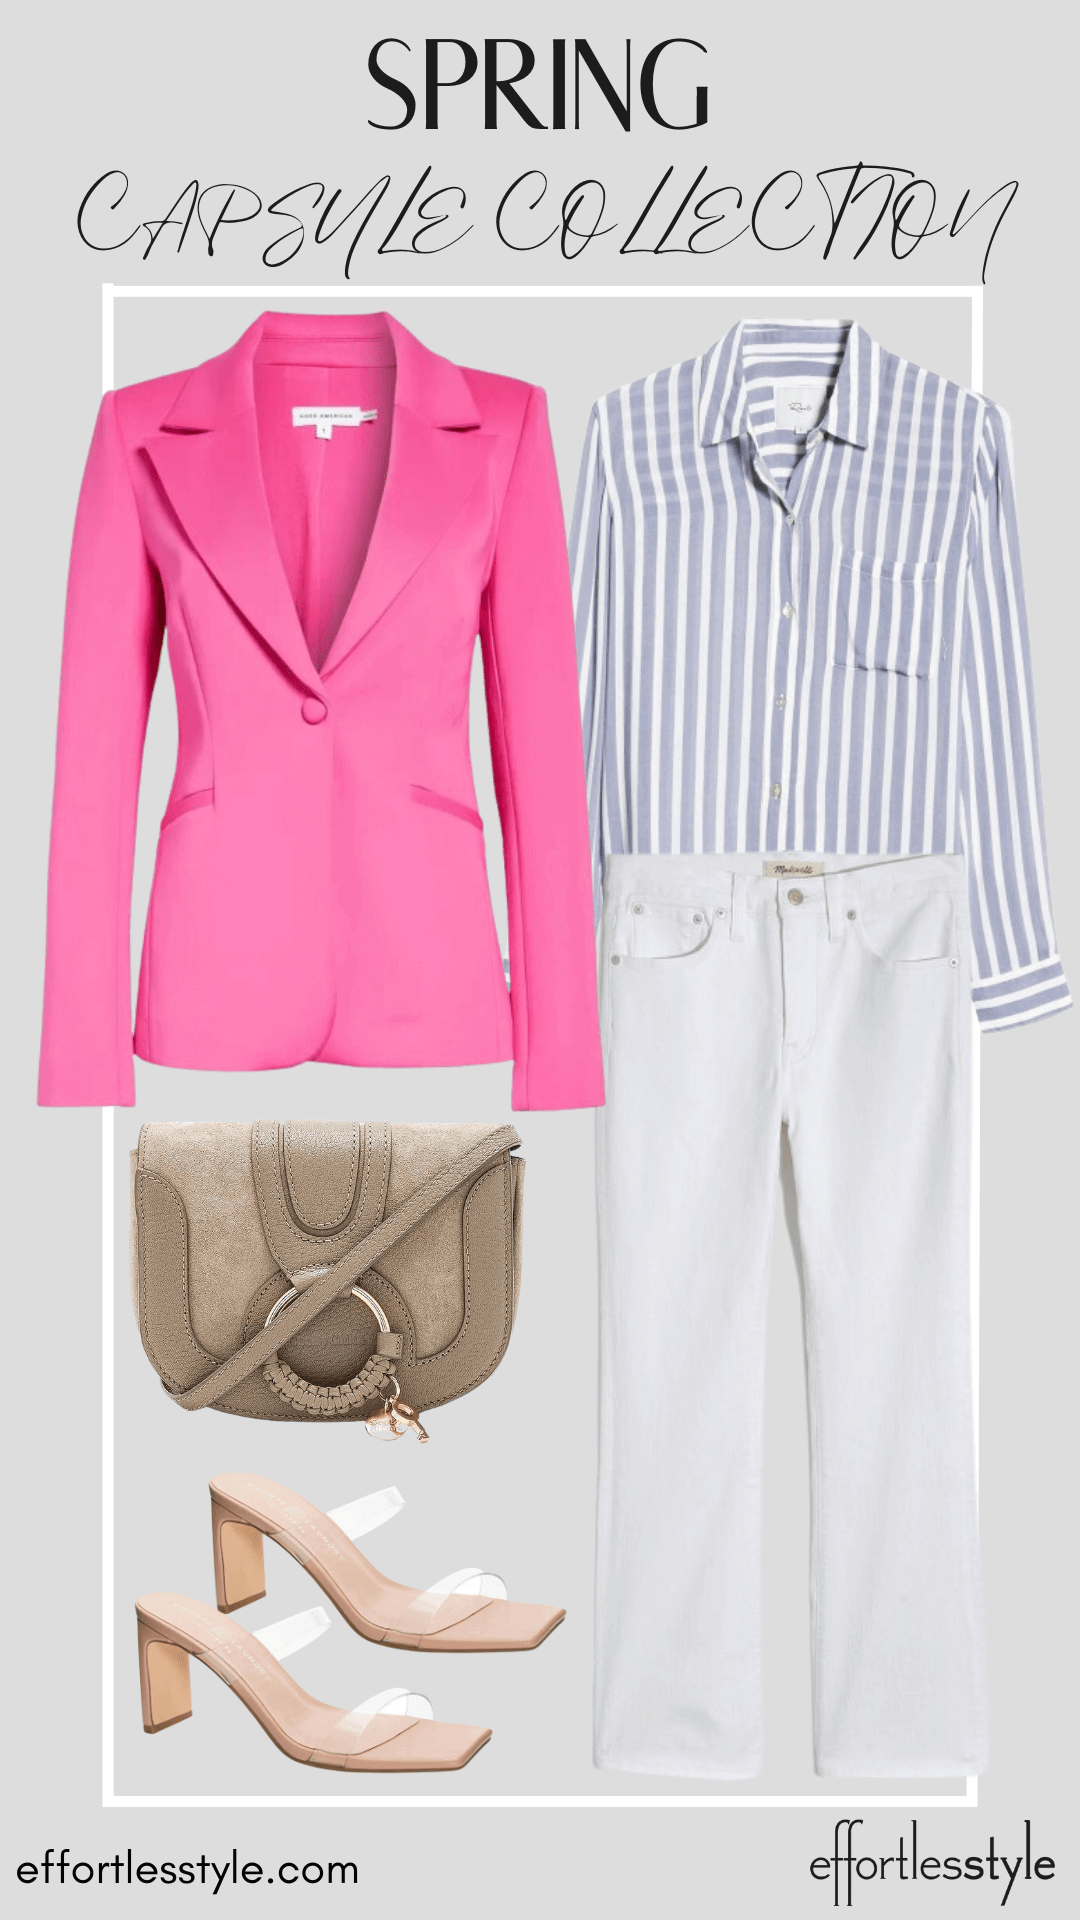 How To Wear Our Spring Capsule Wardrobe - Part 2 Striped Button-Up Shirt & Statement Blazer & White Jeans how to wear hot pink this spring how to style a button-up shirt for spring how to wear a button-up shirt with white jeans how to style transparent slide sandals this spring the best spring accessories how to wear a button-up shirt with jeans how to wear a blazer with jeans